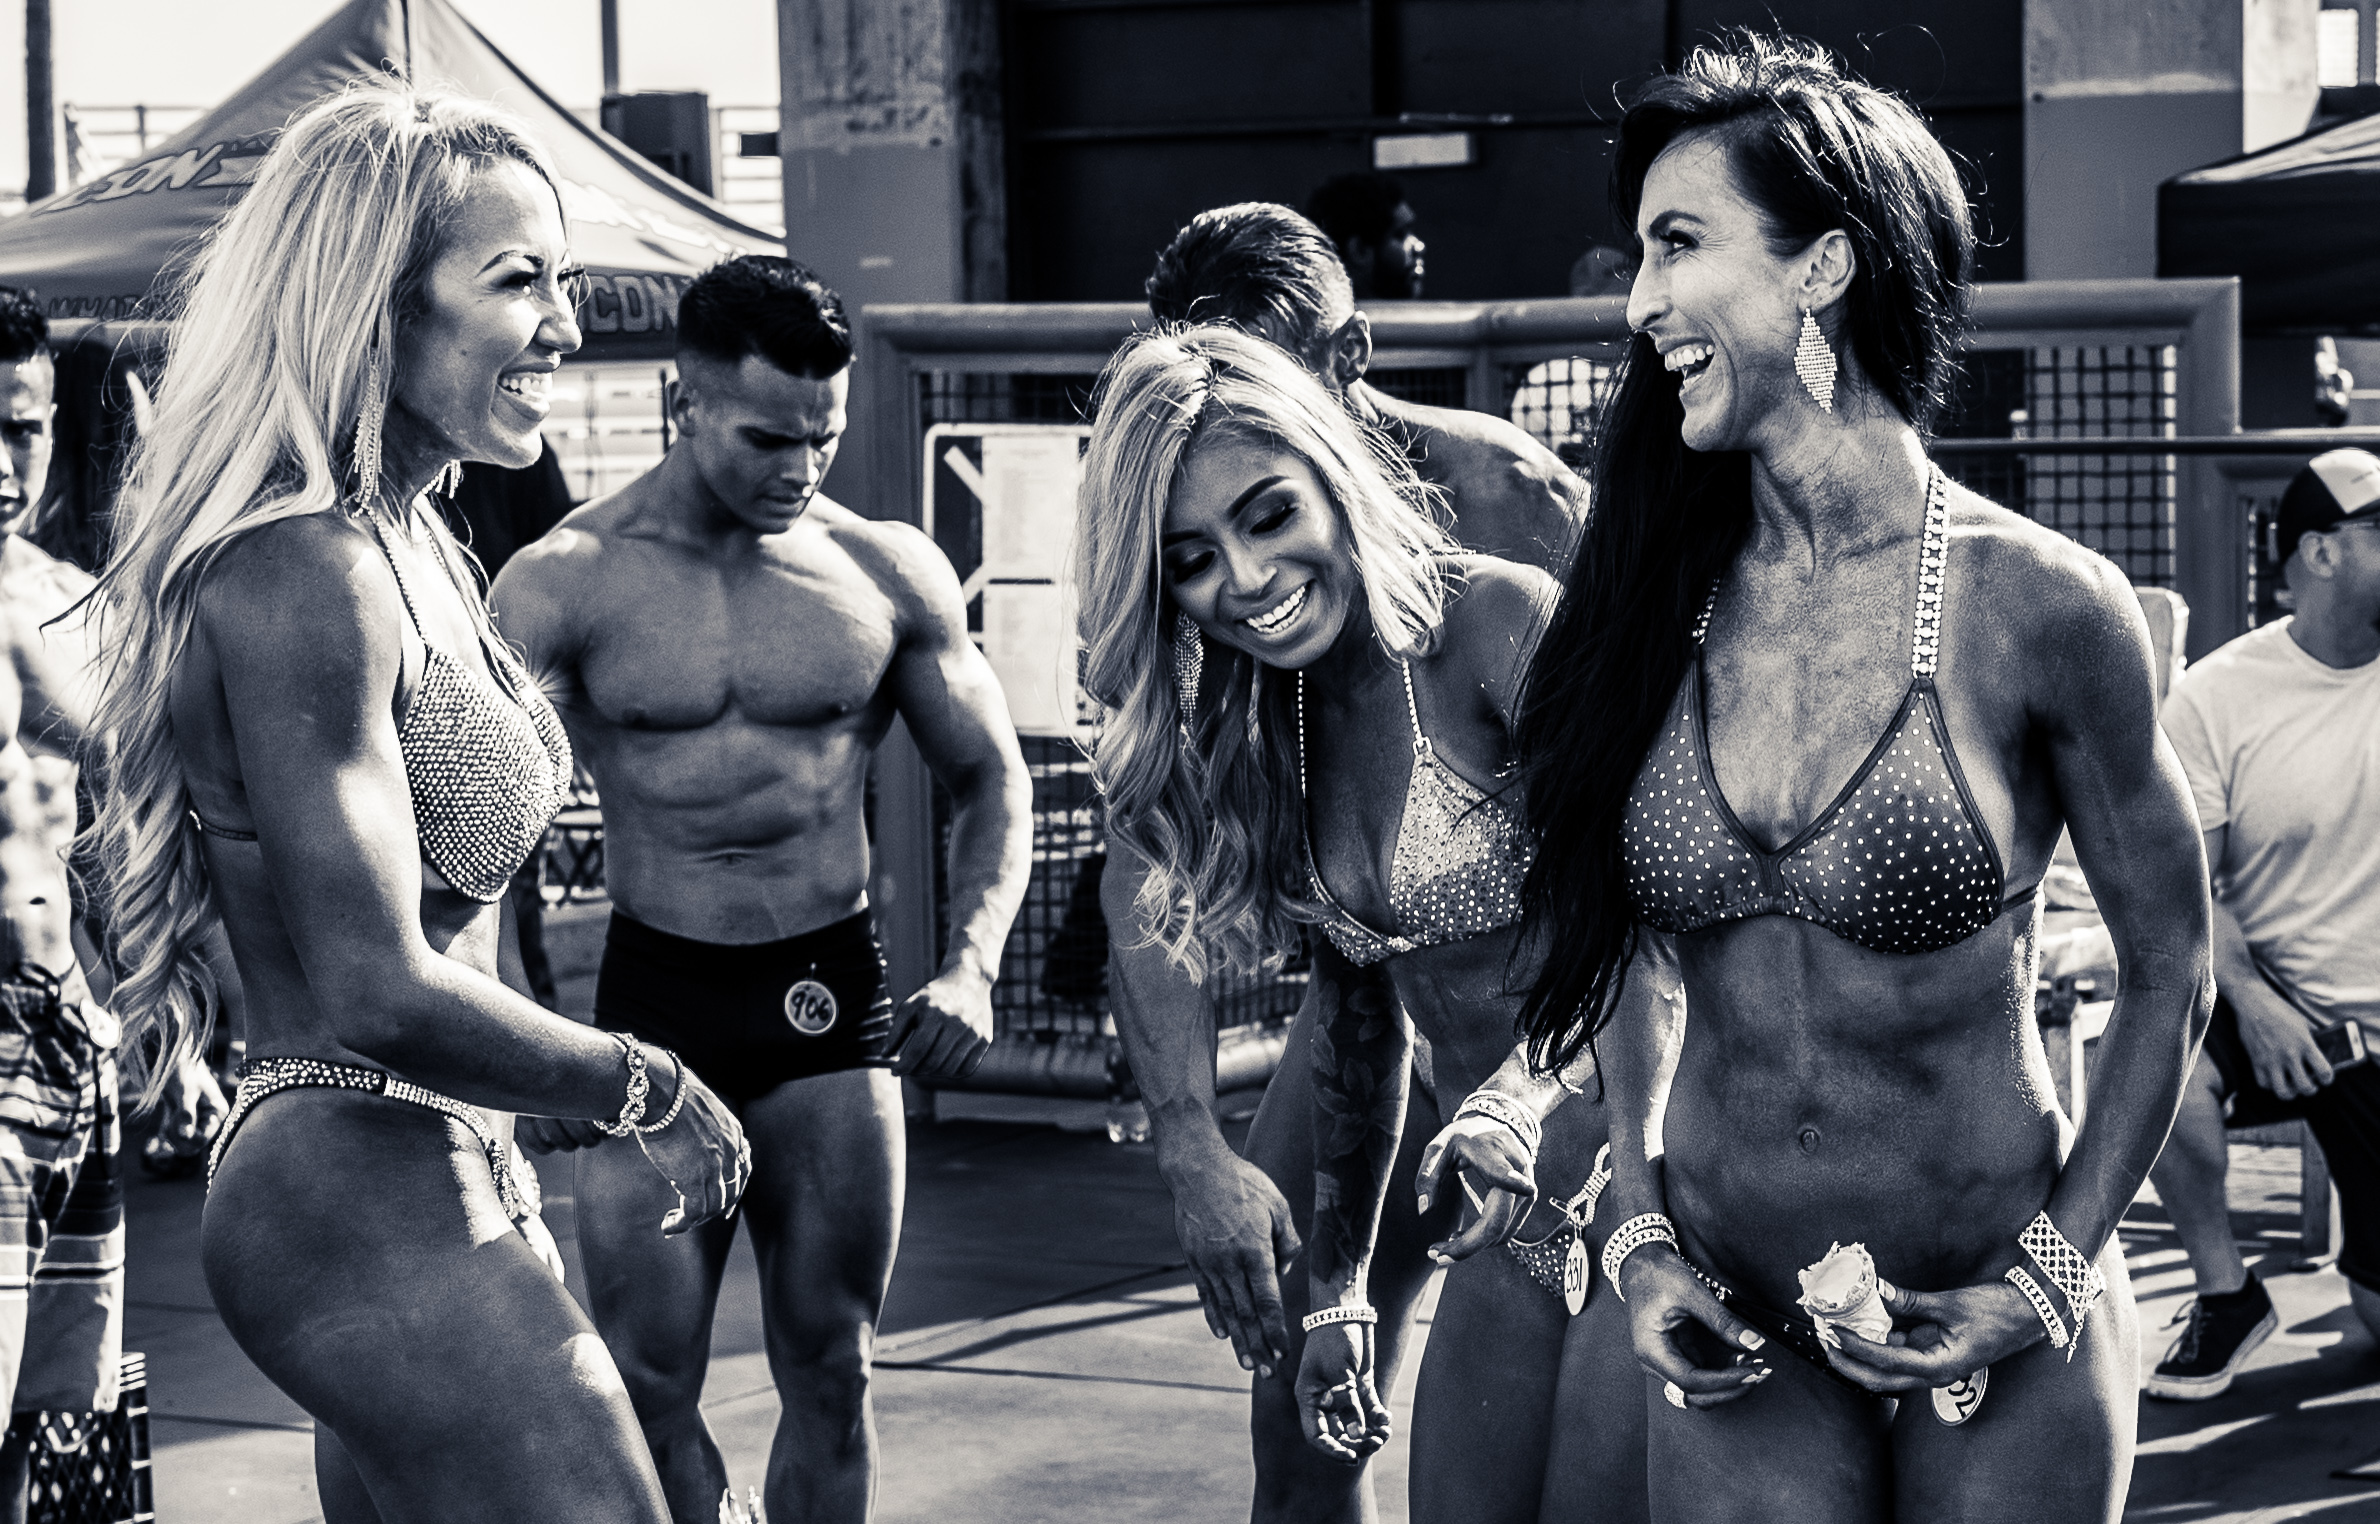 Jenni Stark, Adrianne Meese, and other competitors smiling & laughing after the Labor Day Muscle Beach Championship competition in Venice Beach, CA